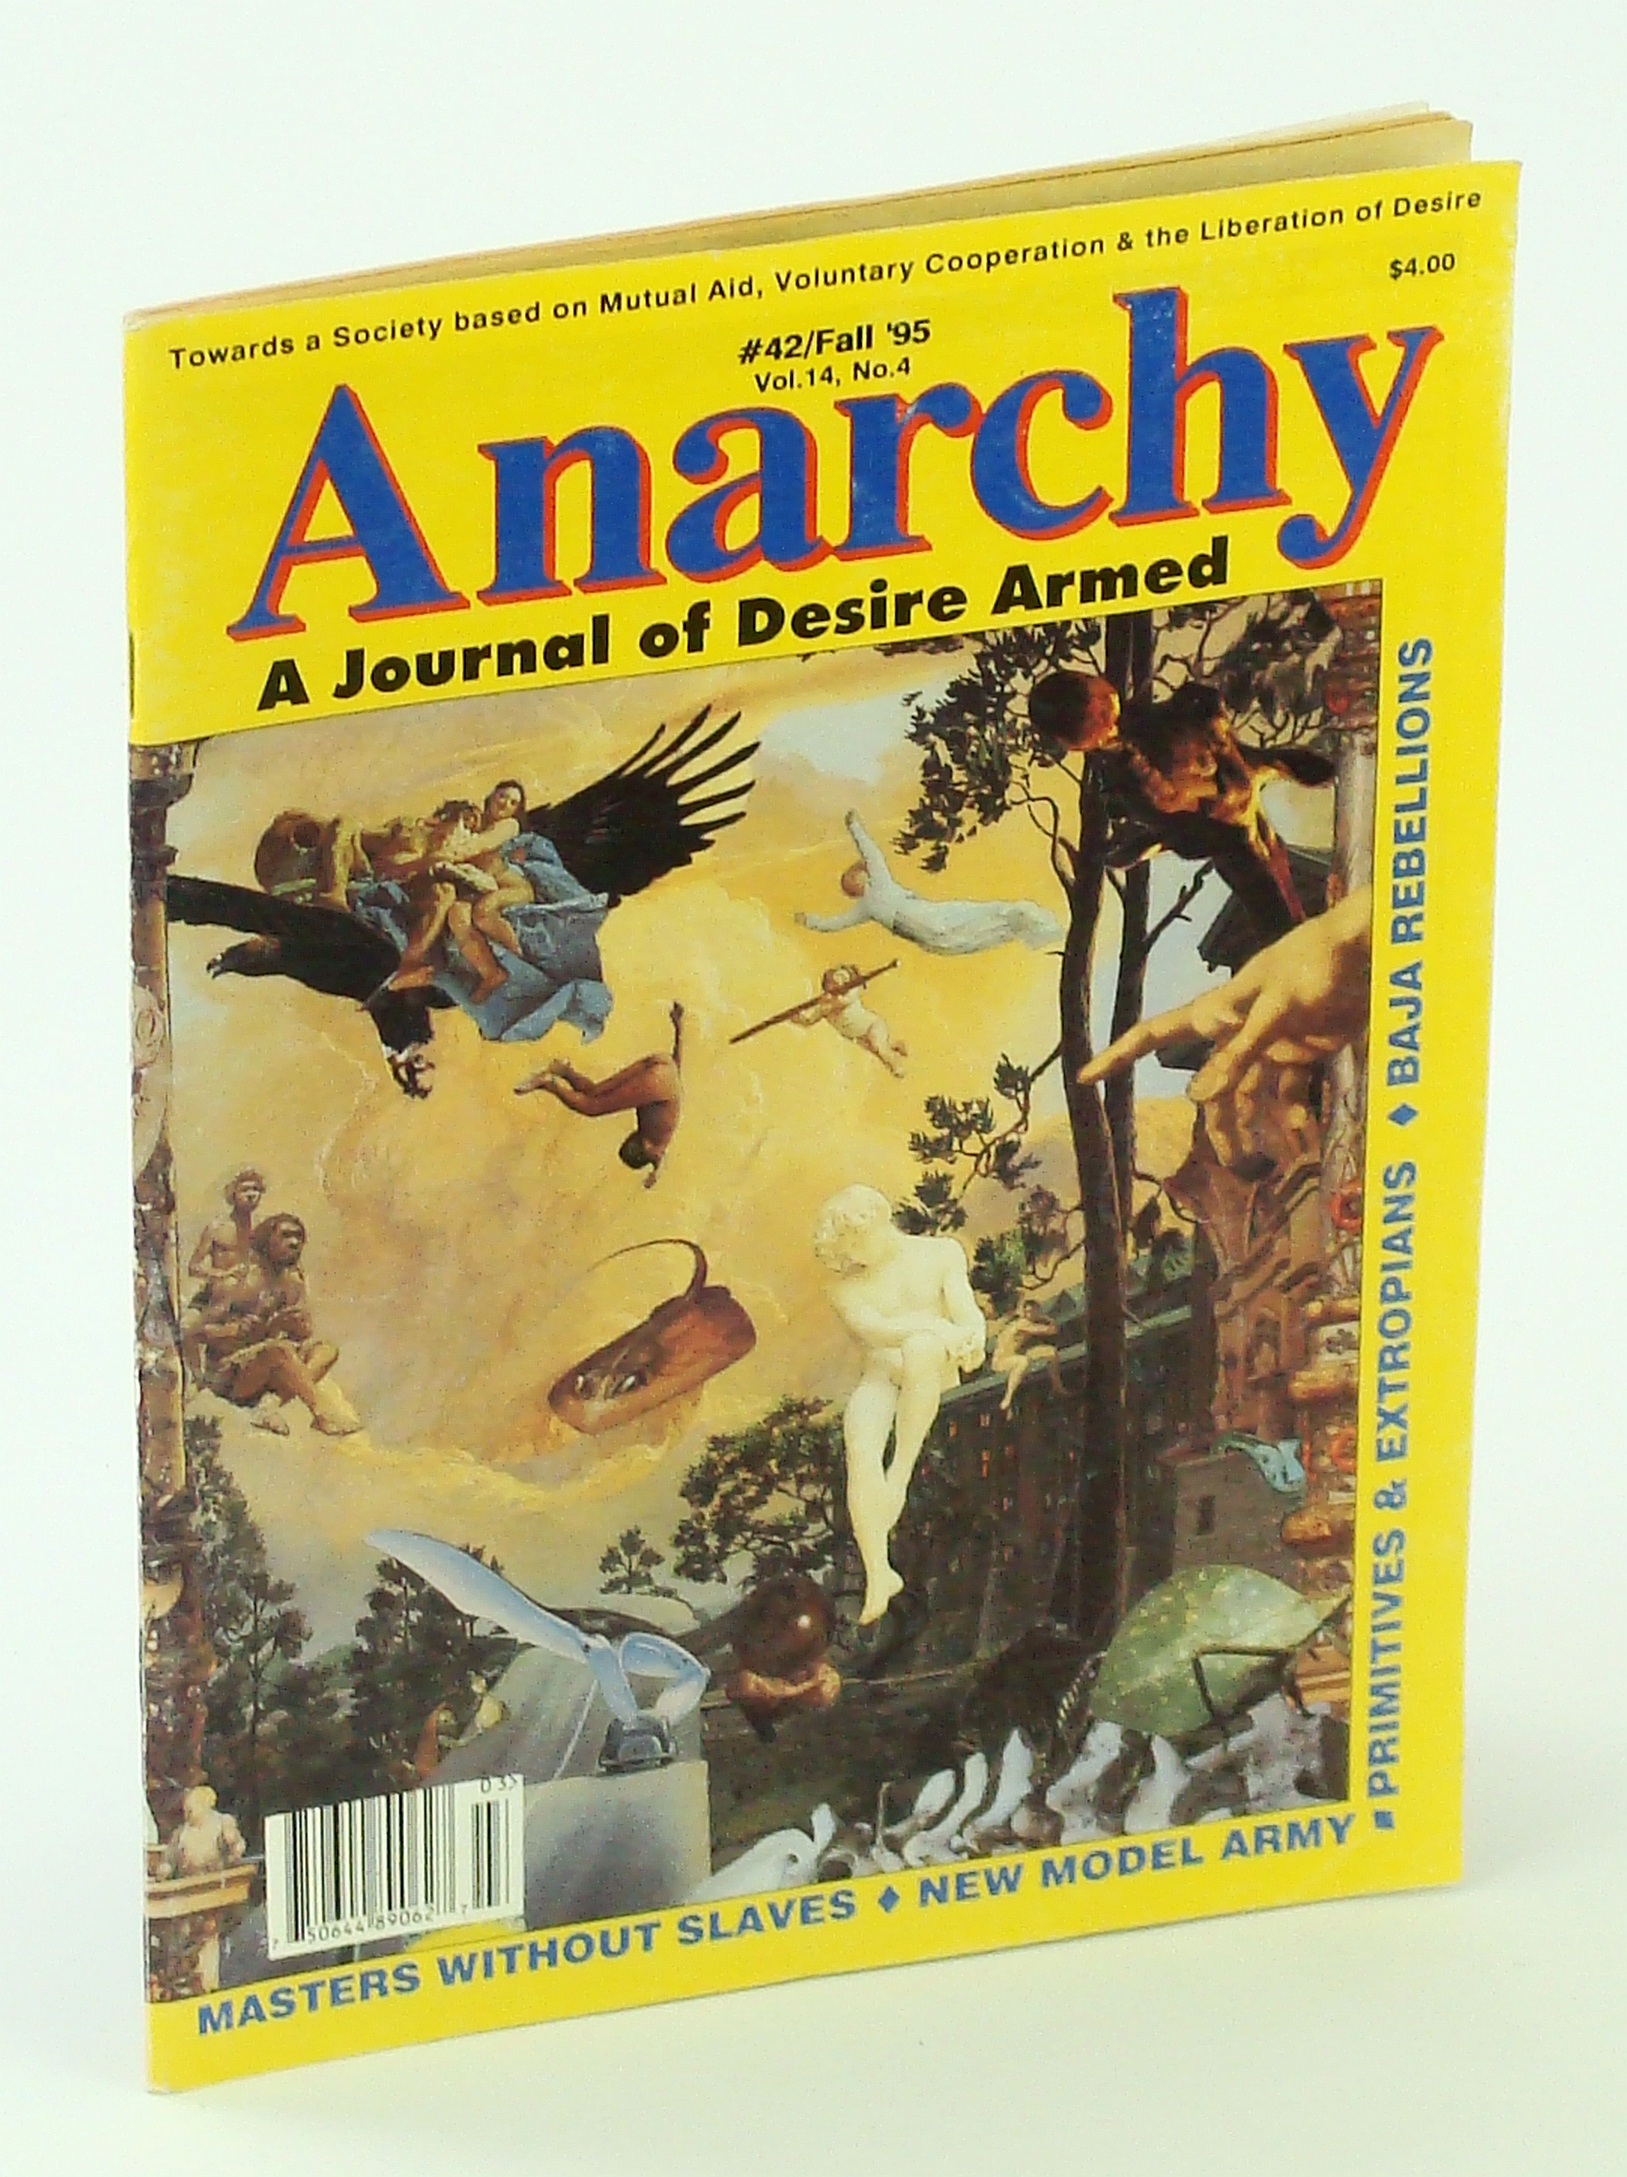 Image for Anarchy [Magazine] A Journal of Desire Armed, #42, Fall '95 [1995] Vol 14, No. 4 - Masters Without Slaves